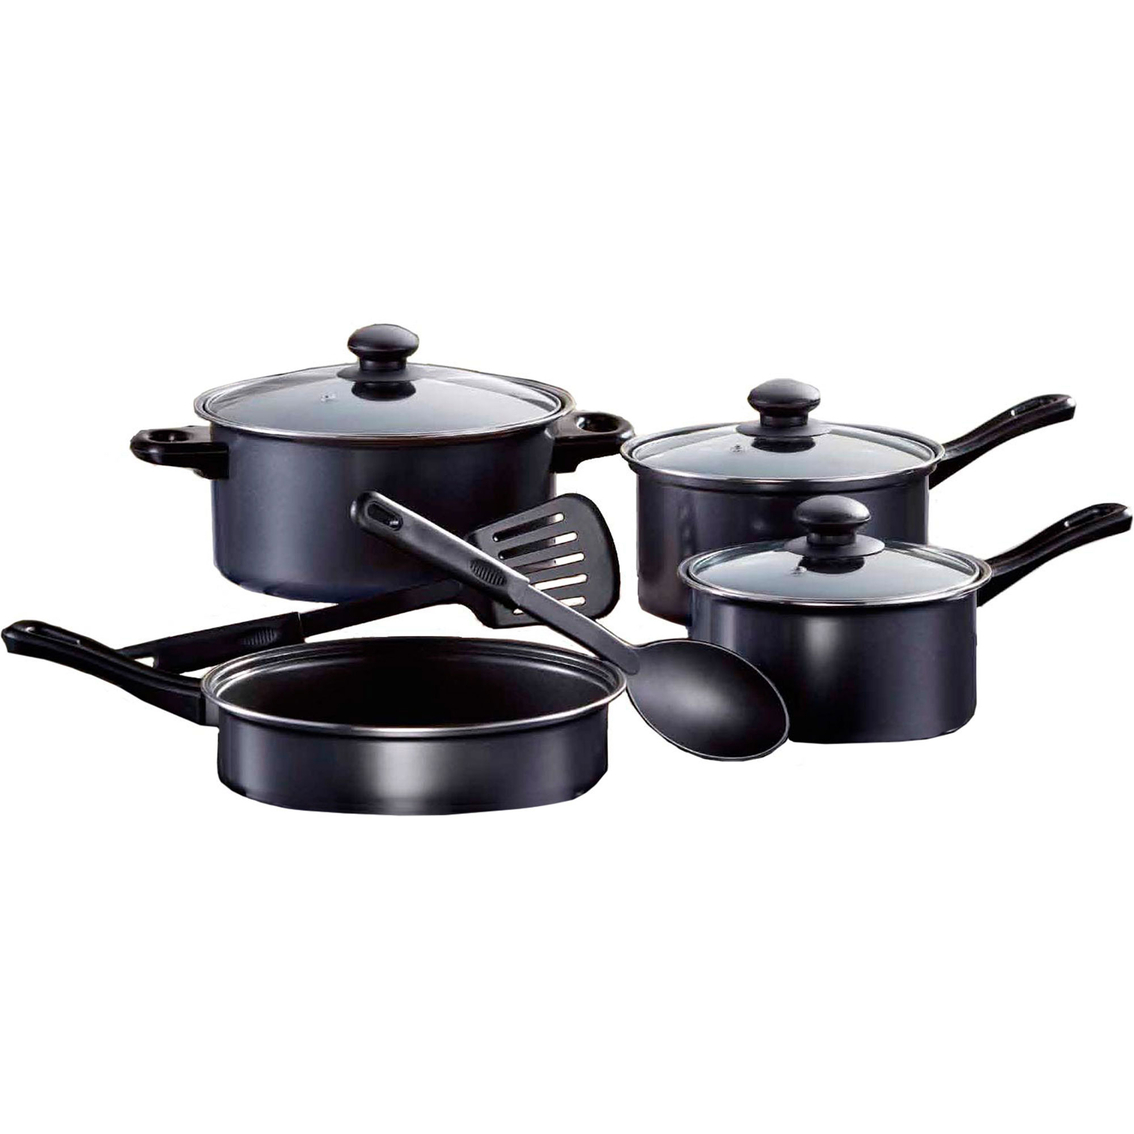 Simply Perfect 9 Pc. Nonstick Carbon Steel Cookware, Non-stick, Household